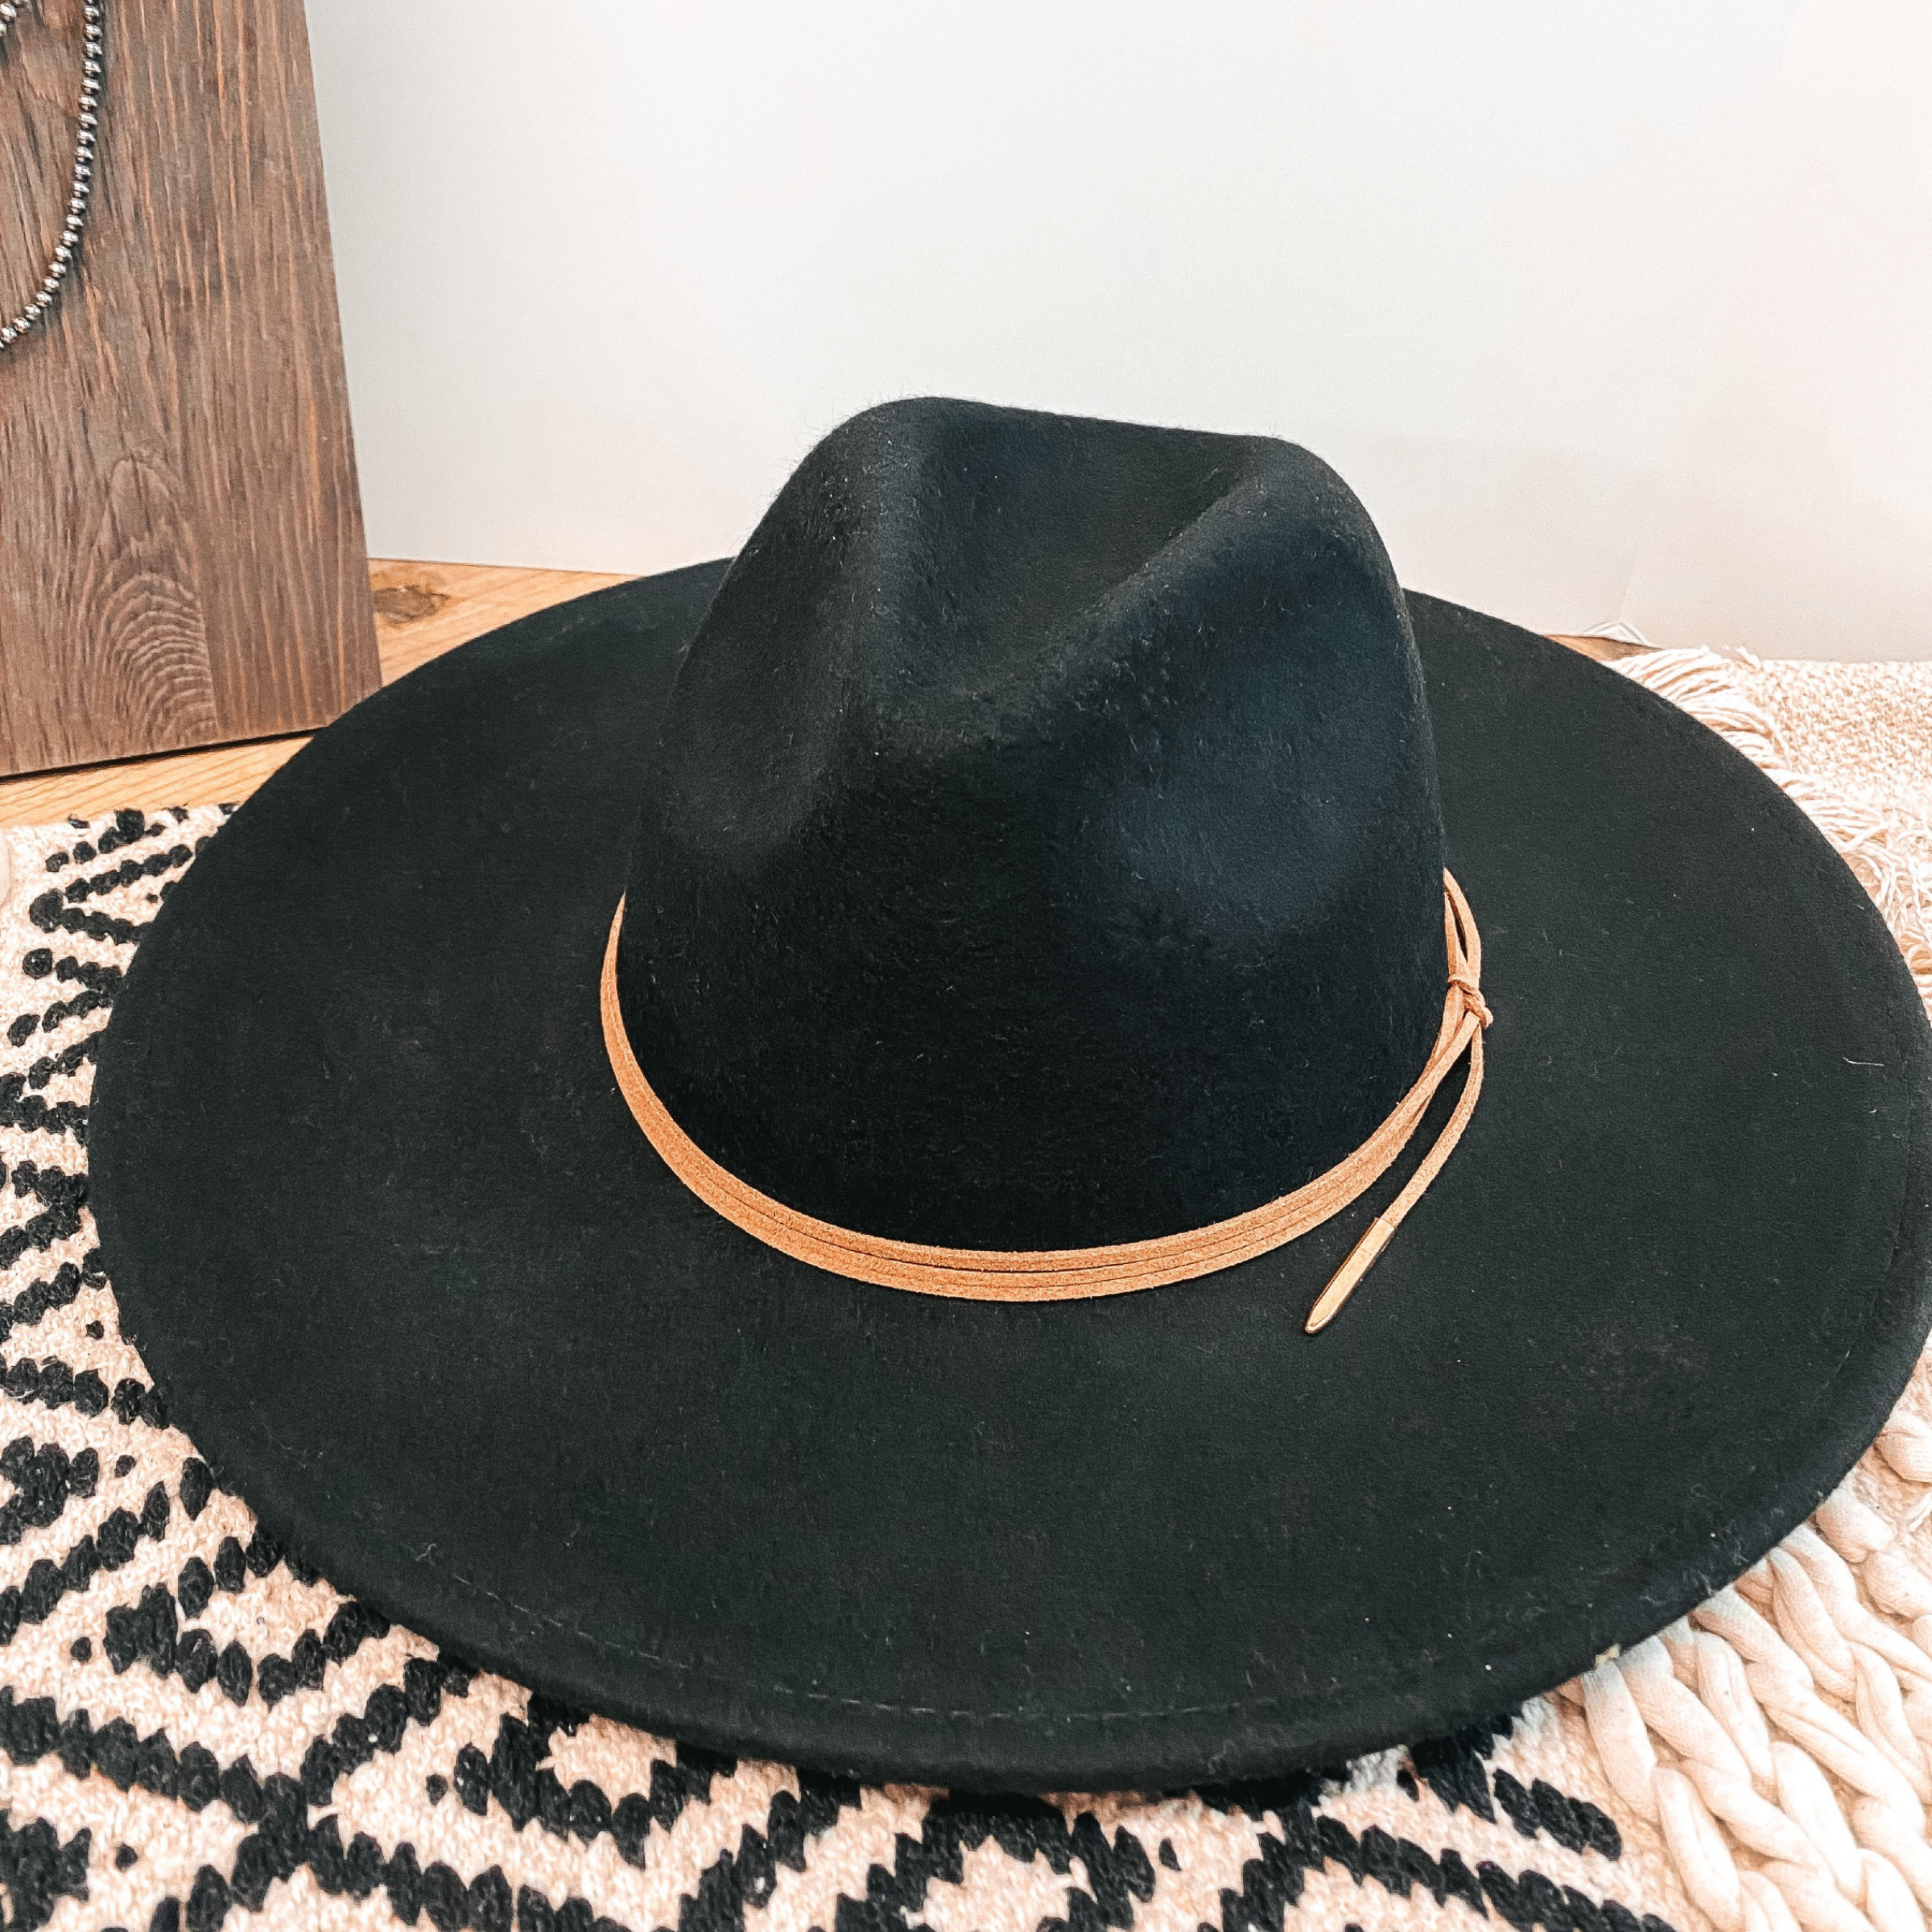 Arizona Skies Felt Hat with Wrapped Leather Band in Black - Giddy Up Glamour Boutique